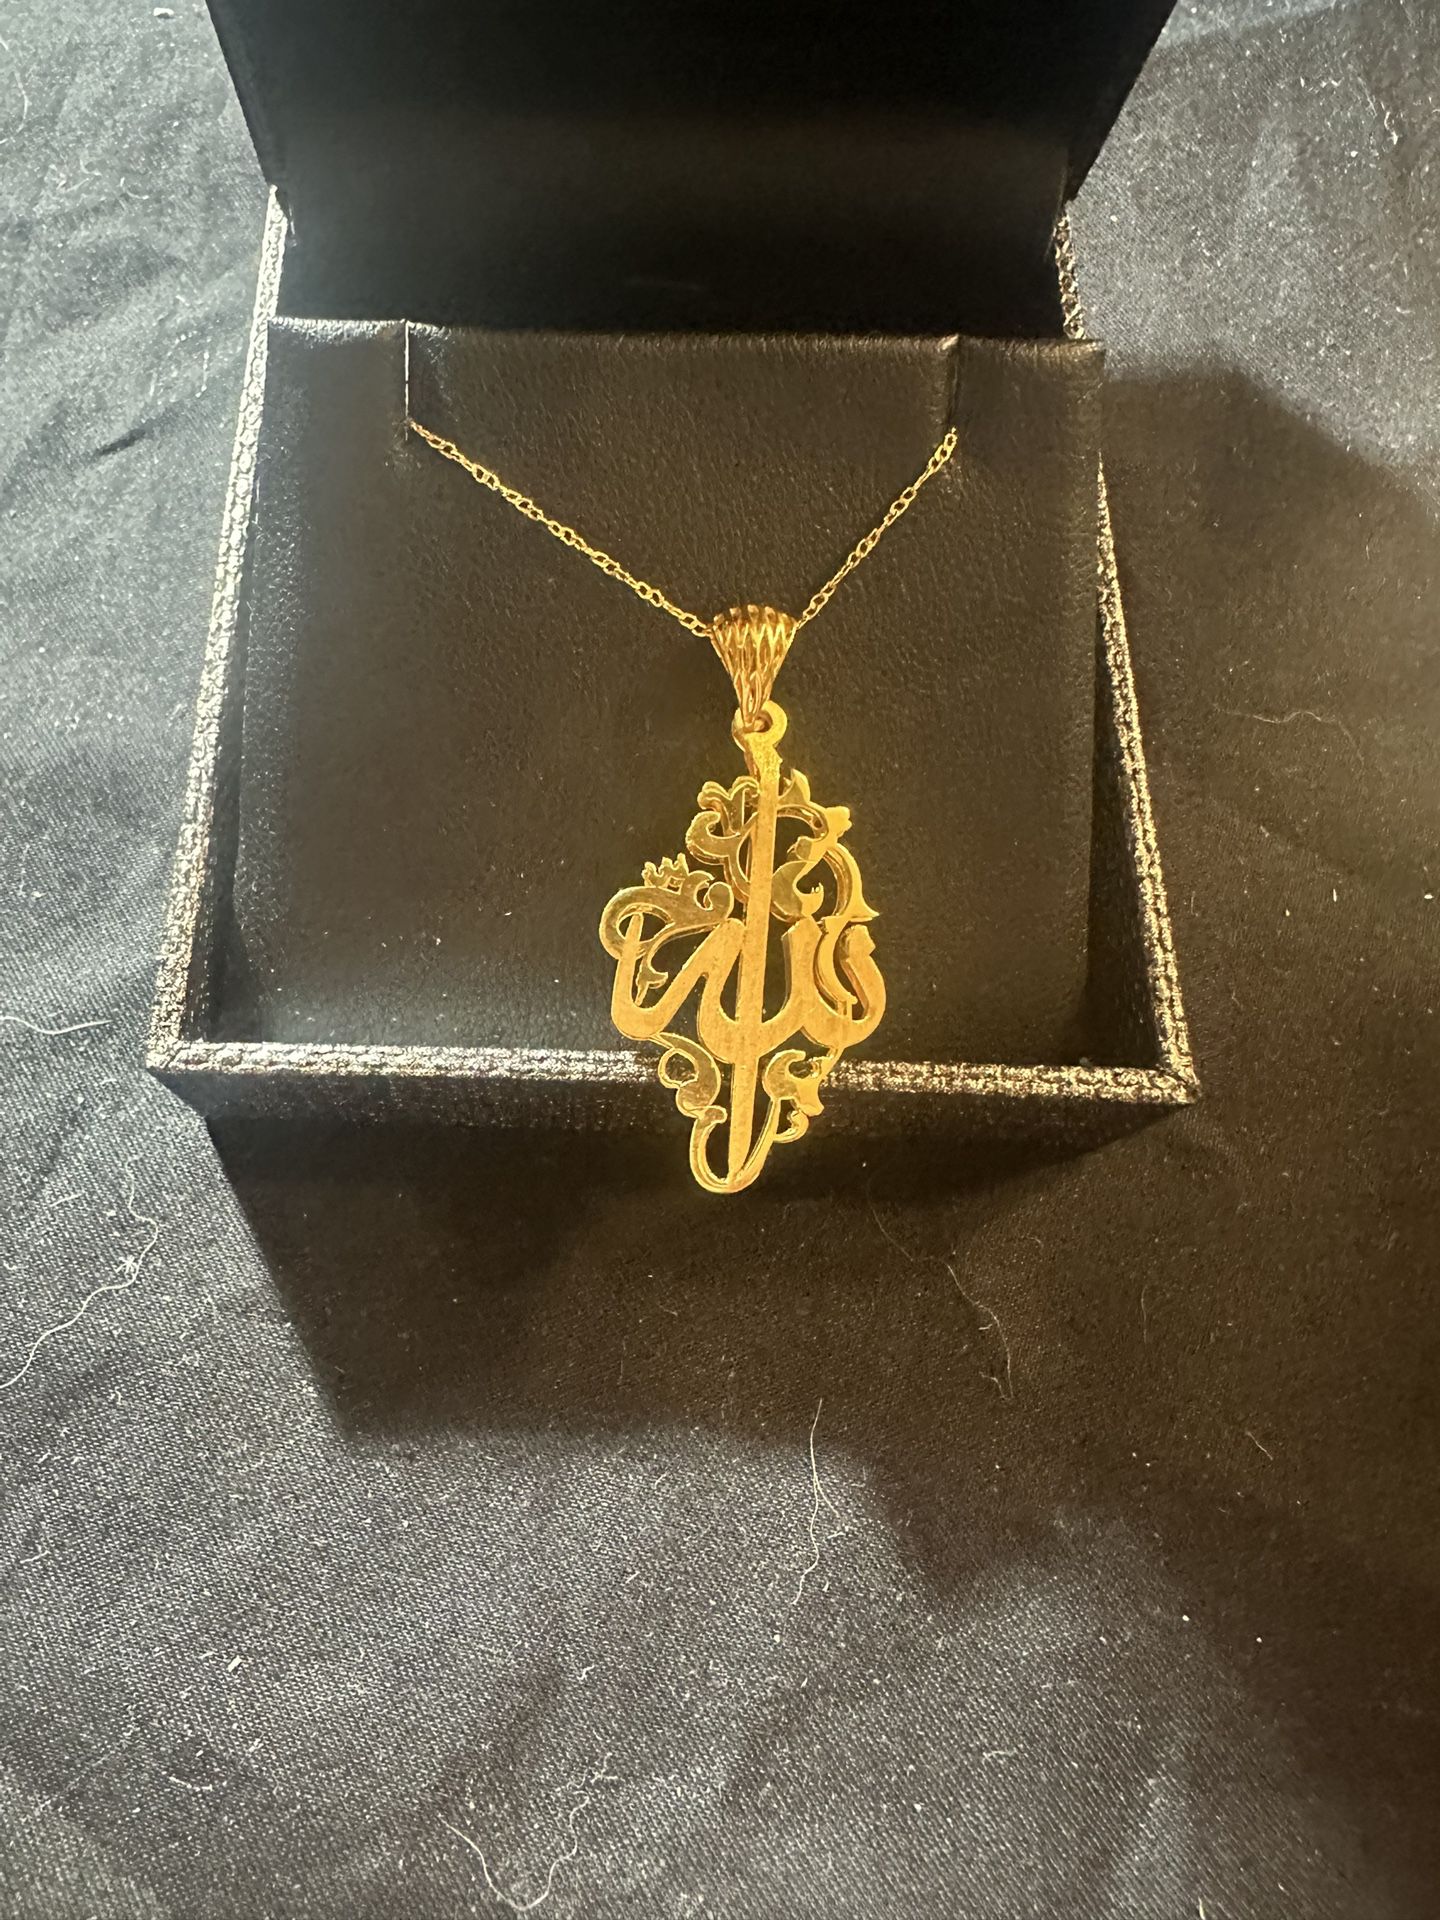 21k Gold Pendant With Chain